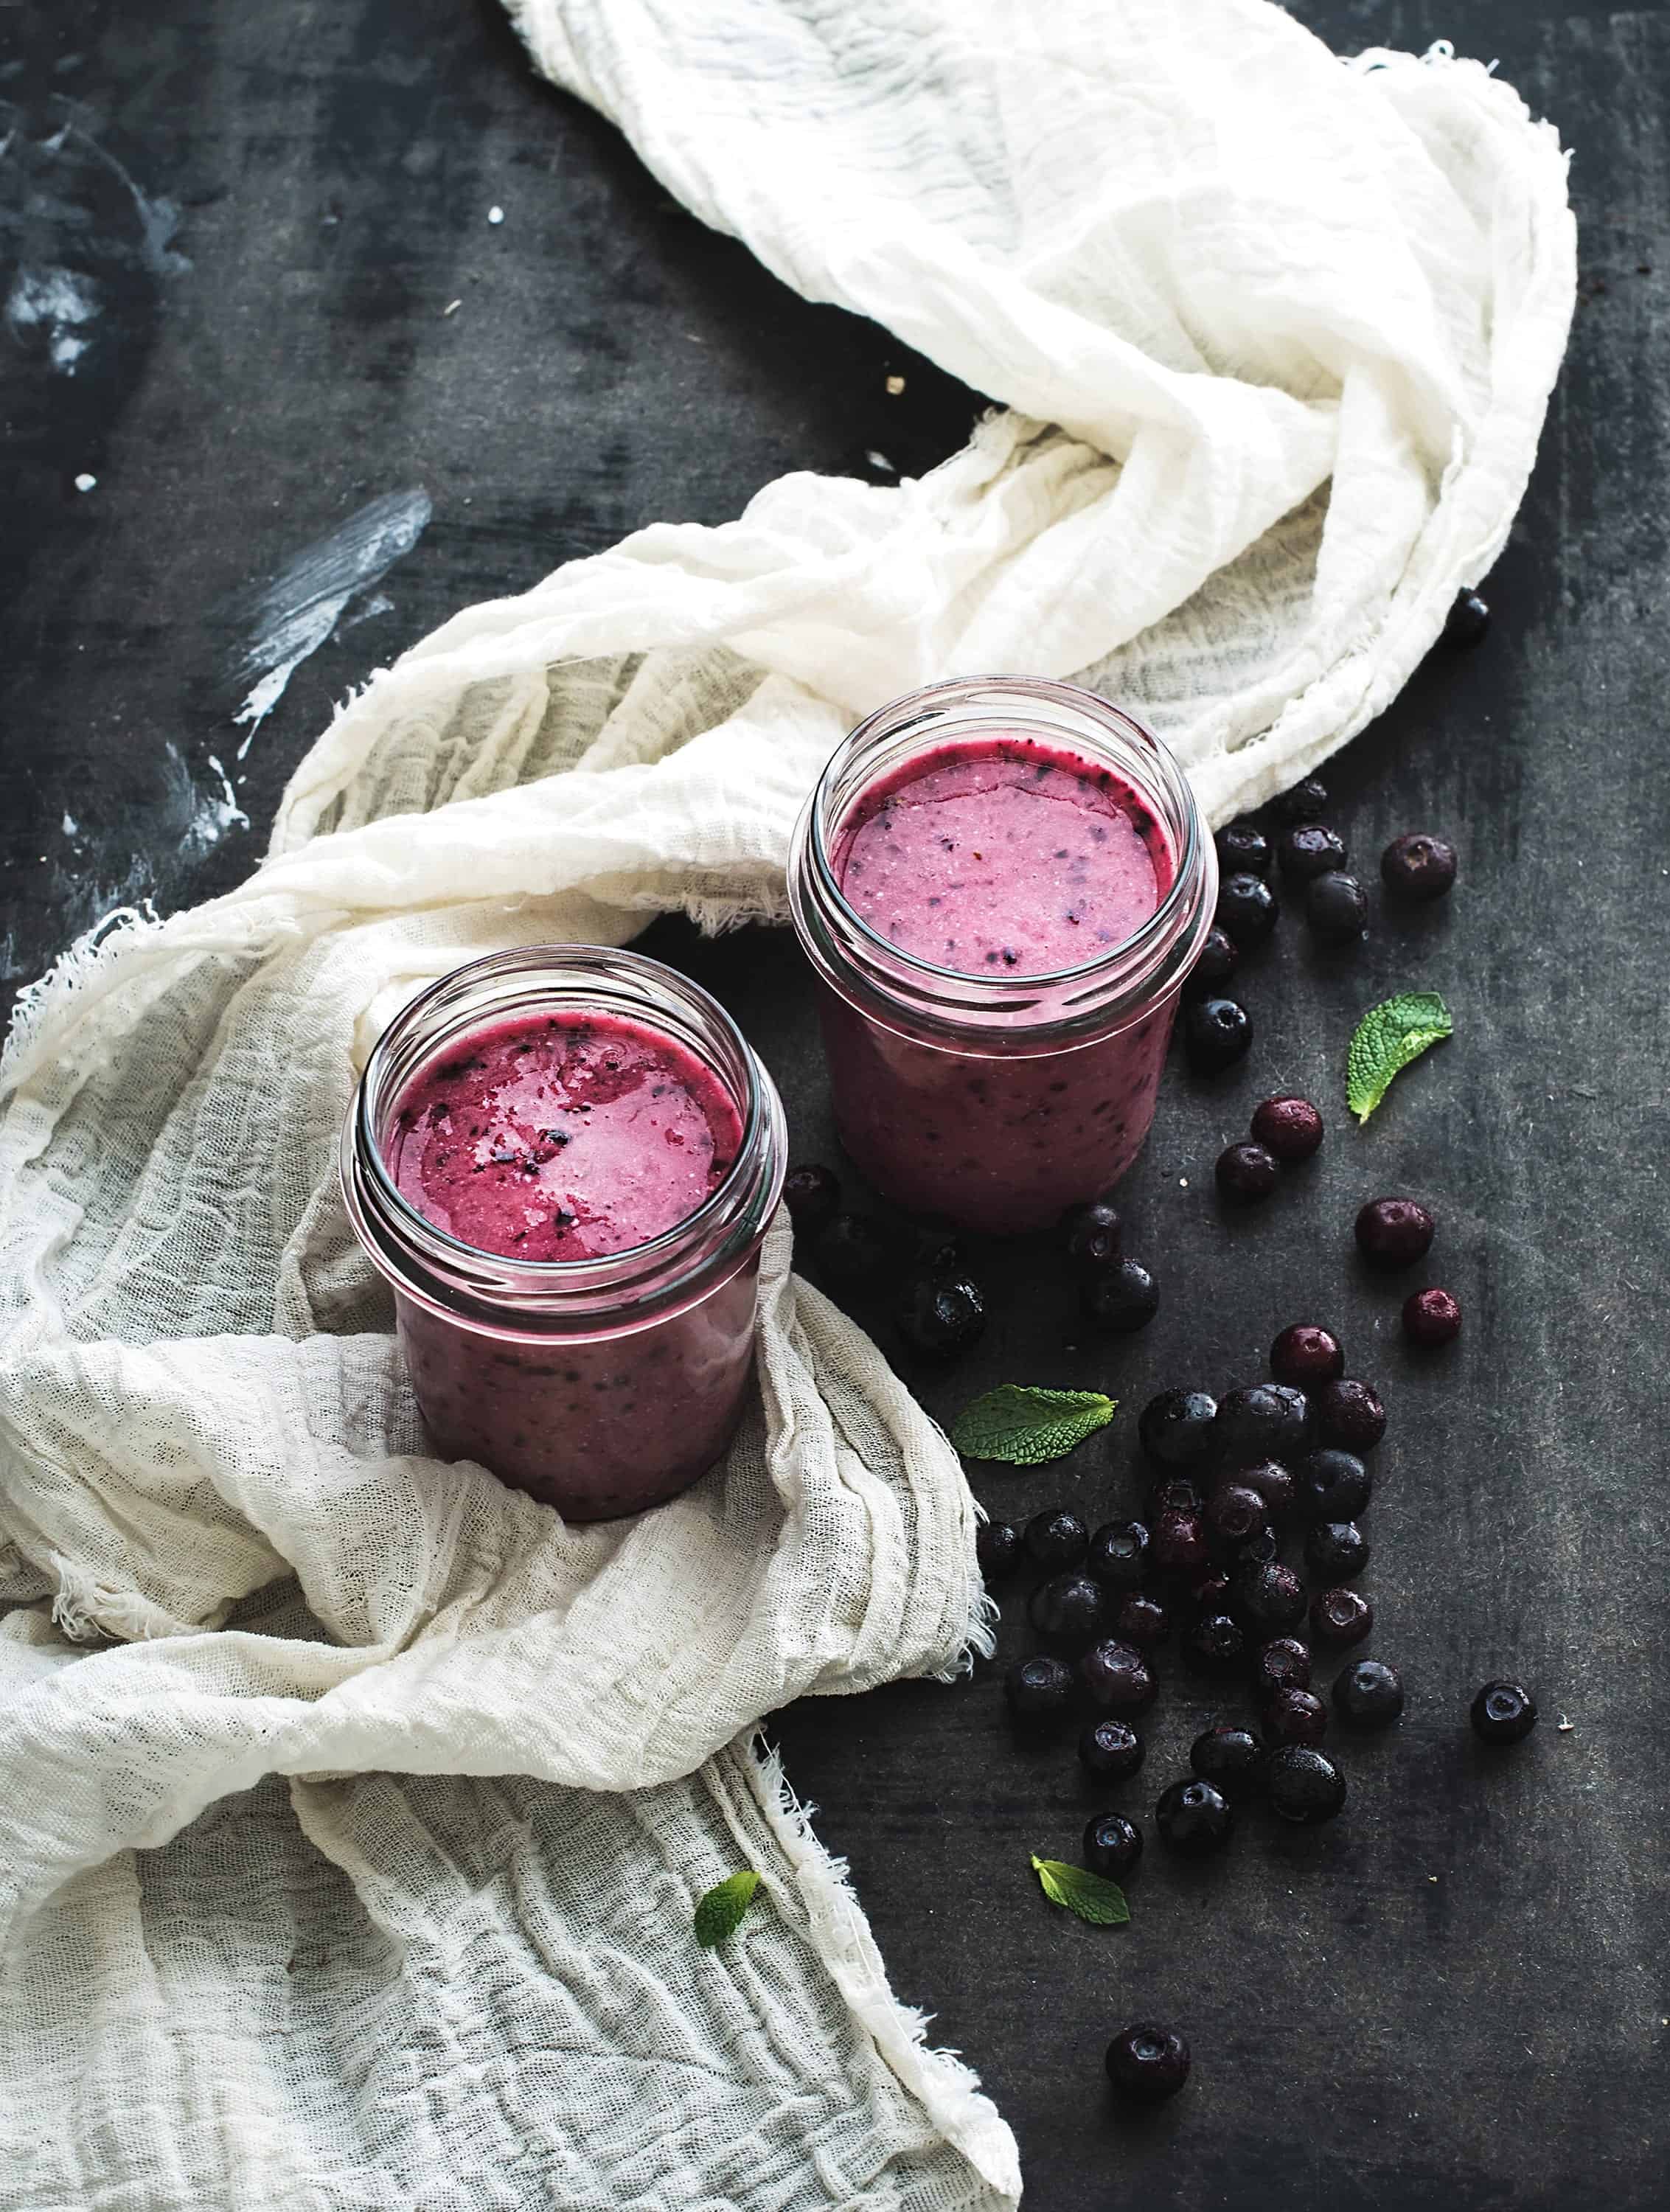 15 Healthy Ingredients to Power Up Your Smoothie